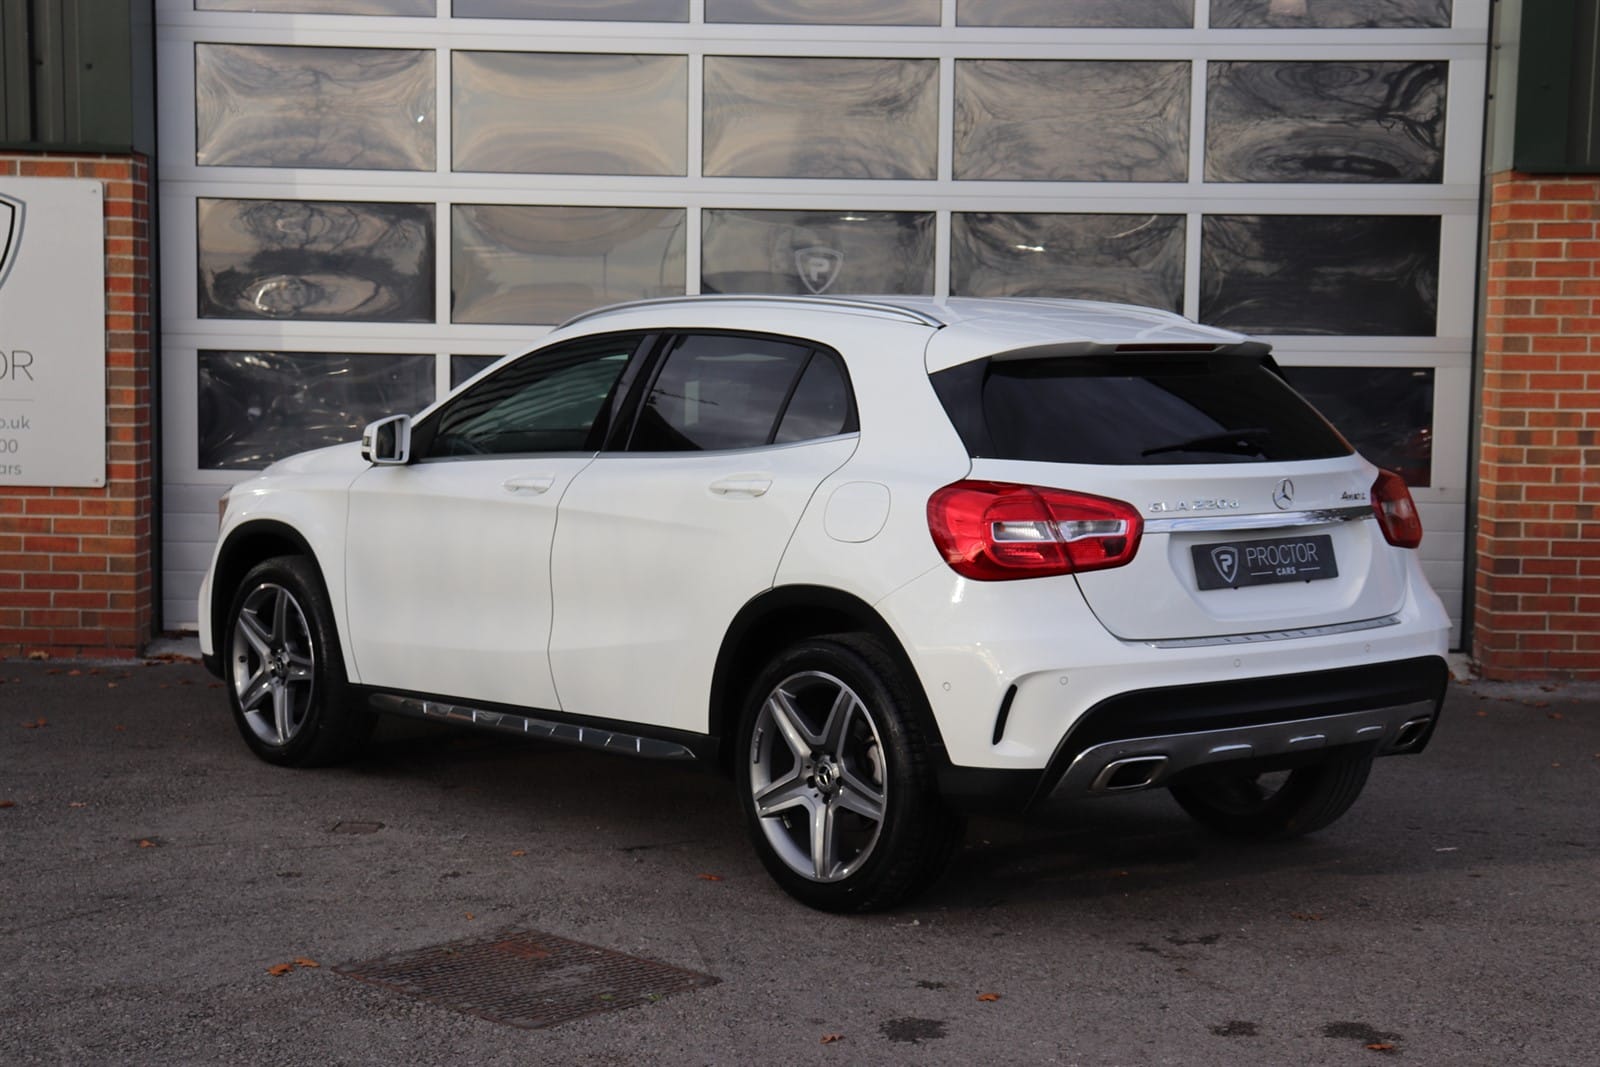 Used Mercedes-Benz GLA220 from Proctor Cars